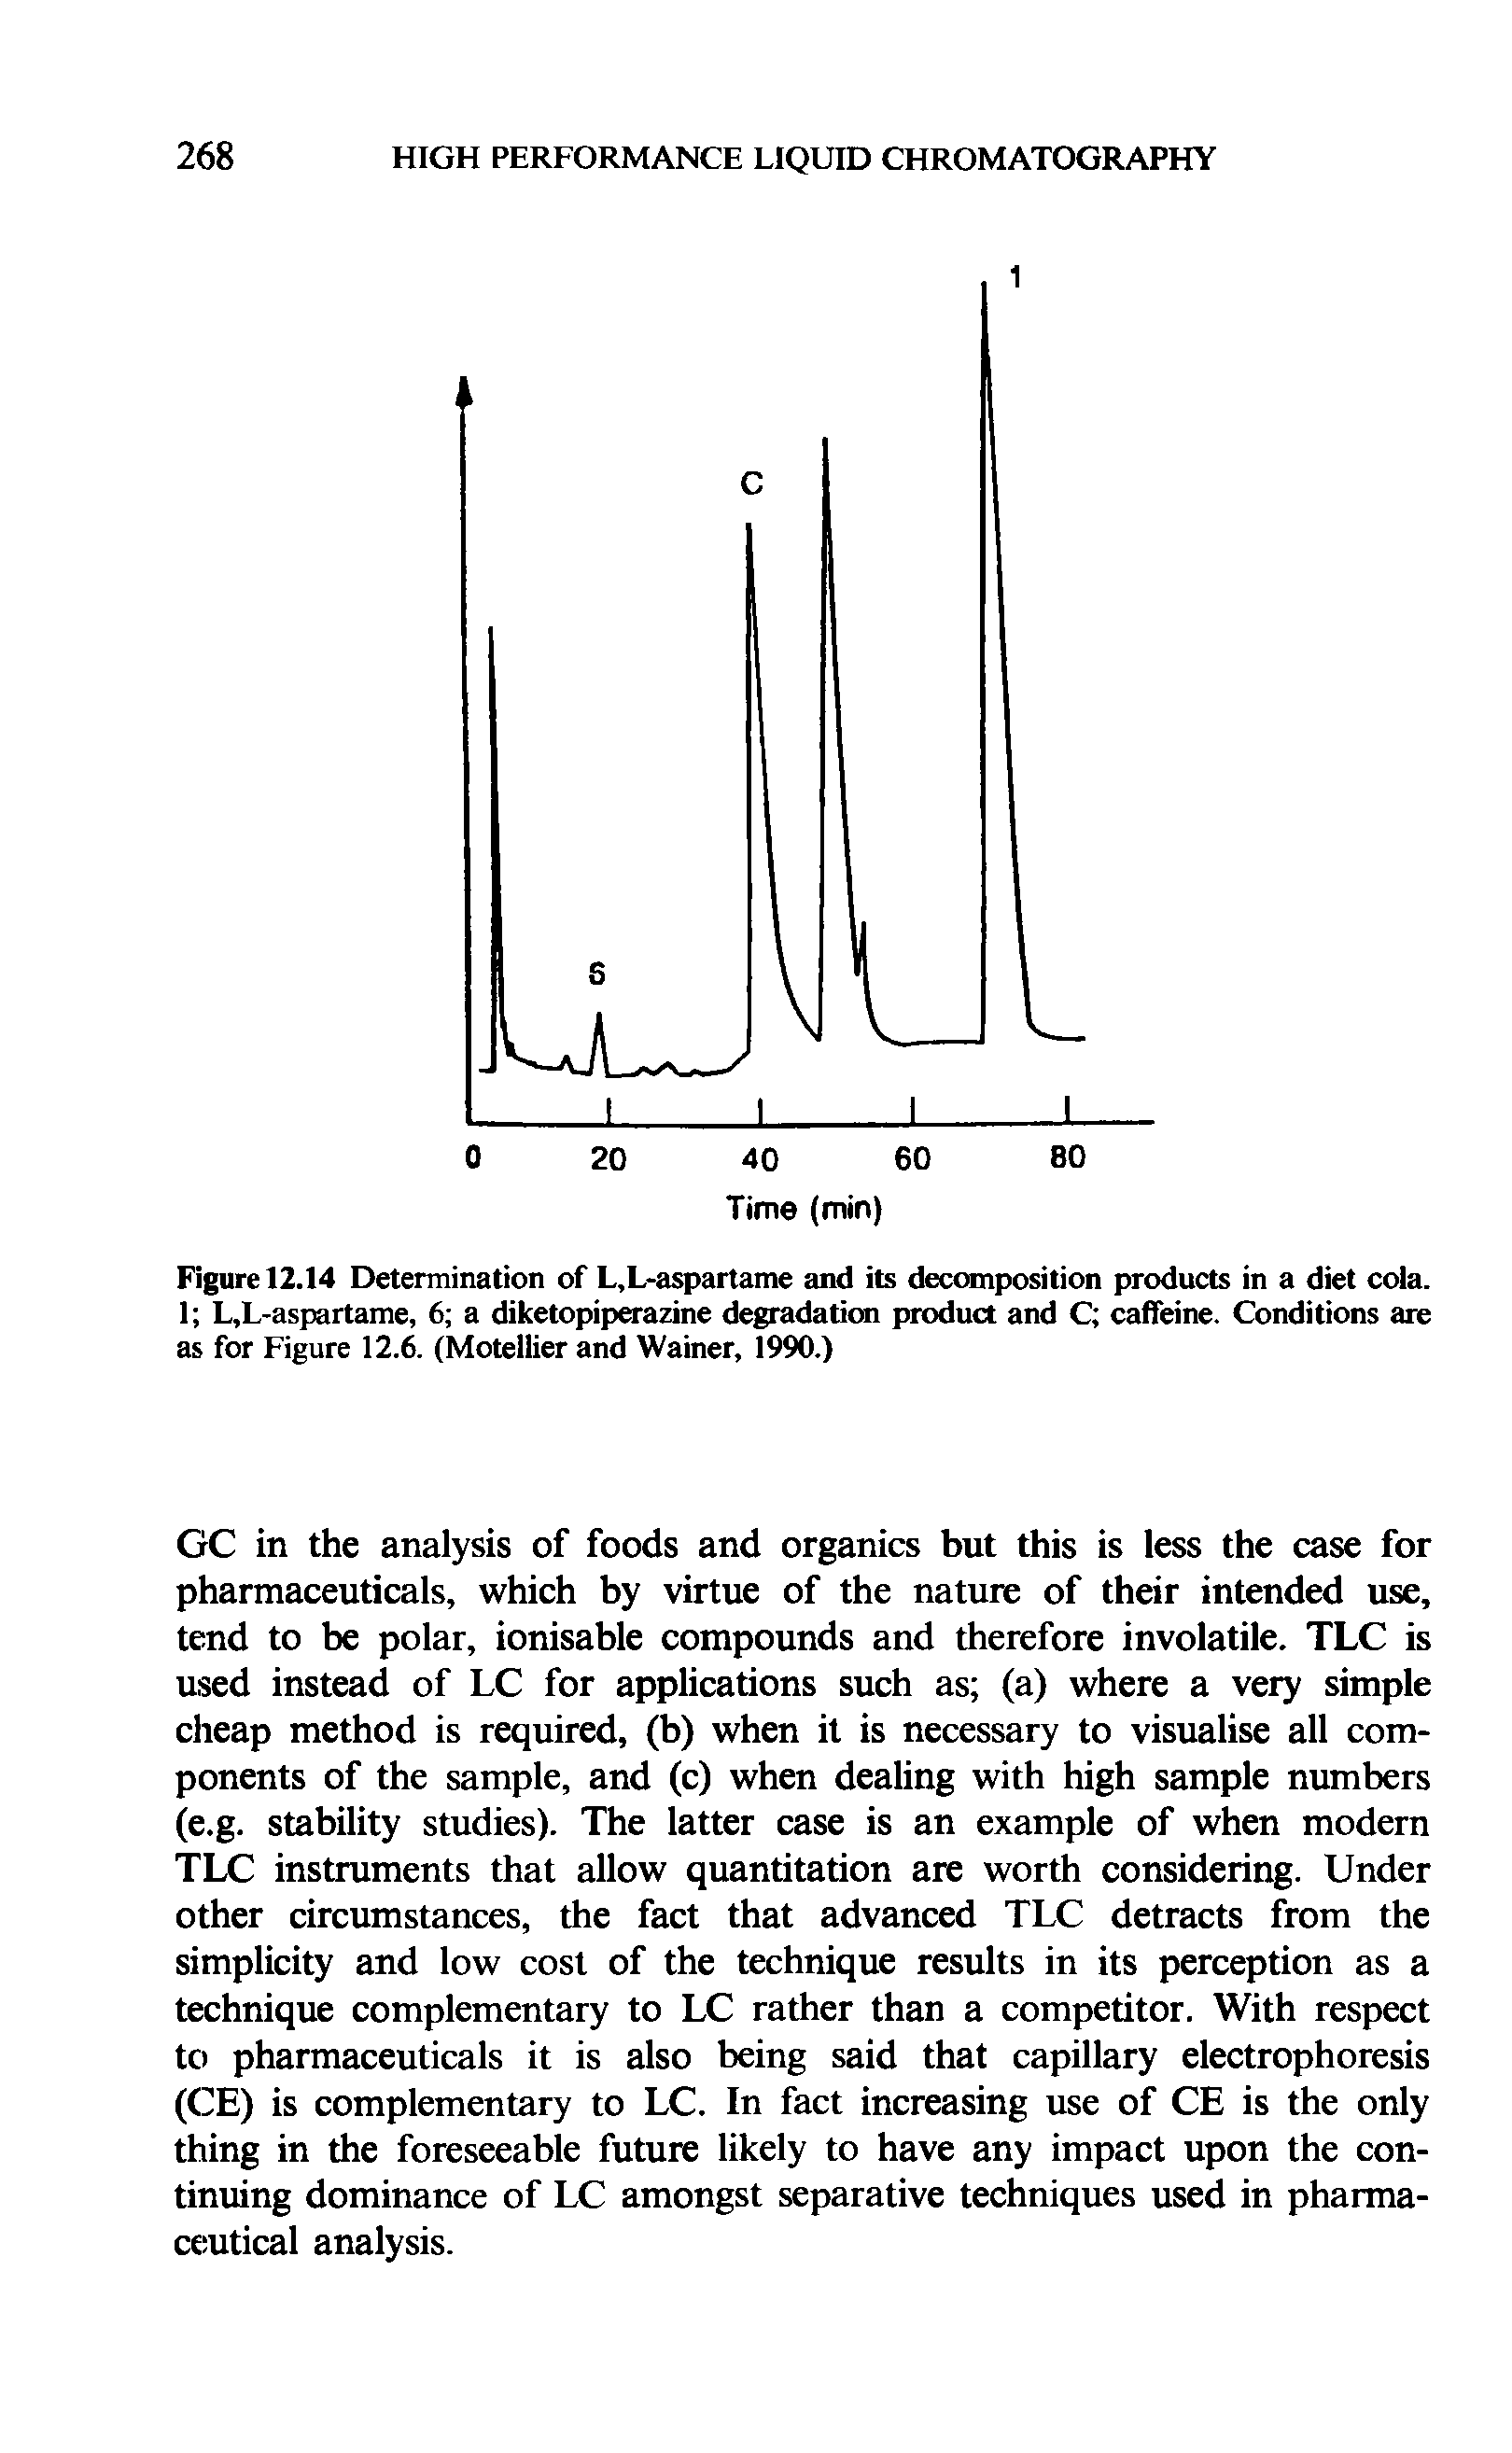 Figure 12.14 Determination of L,L-aspartame and its decomposition products in a diet cola. 1 L,L-uspartame, 6 a diketopiperazine degradation product and C caffeine. Conditions are as for Figure 12.6. (Motellier and Wainer, 1990.)...